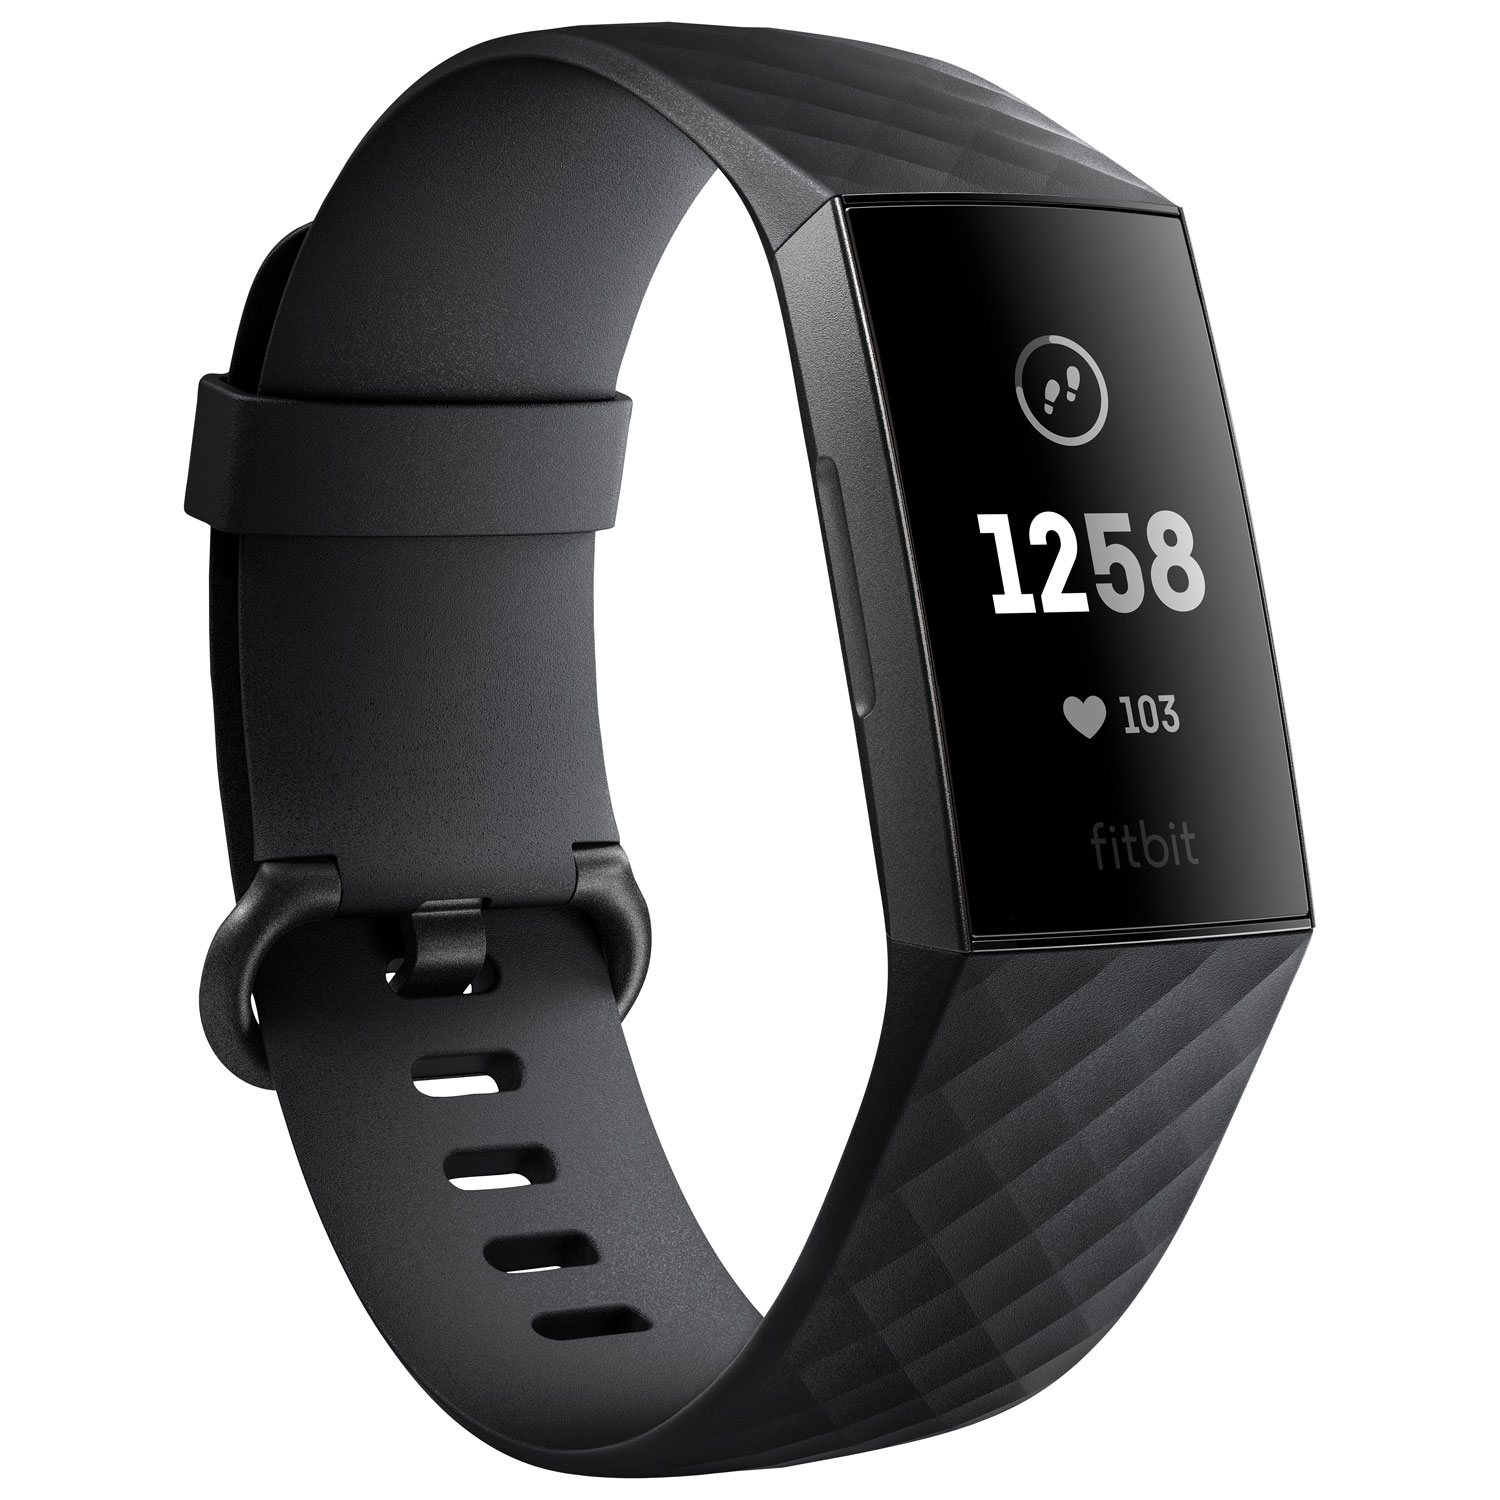 why heart rate matters - fitbit charge 3